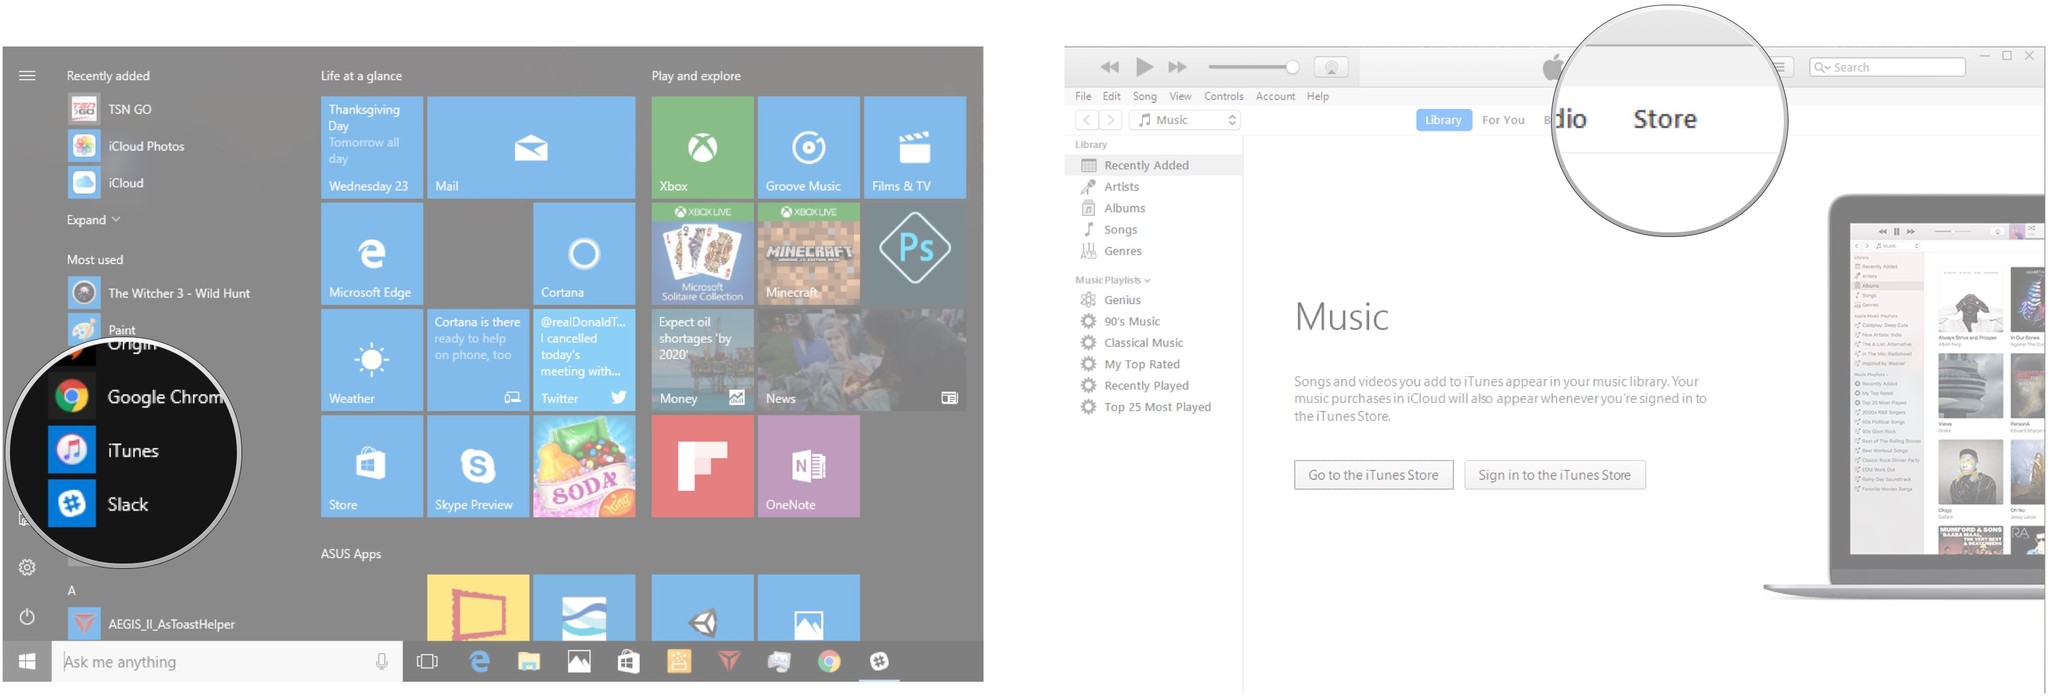 How to download and start using iTunes on Windows 10 | iMore
